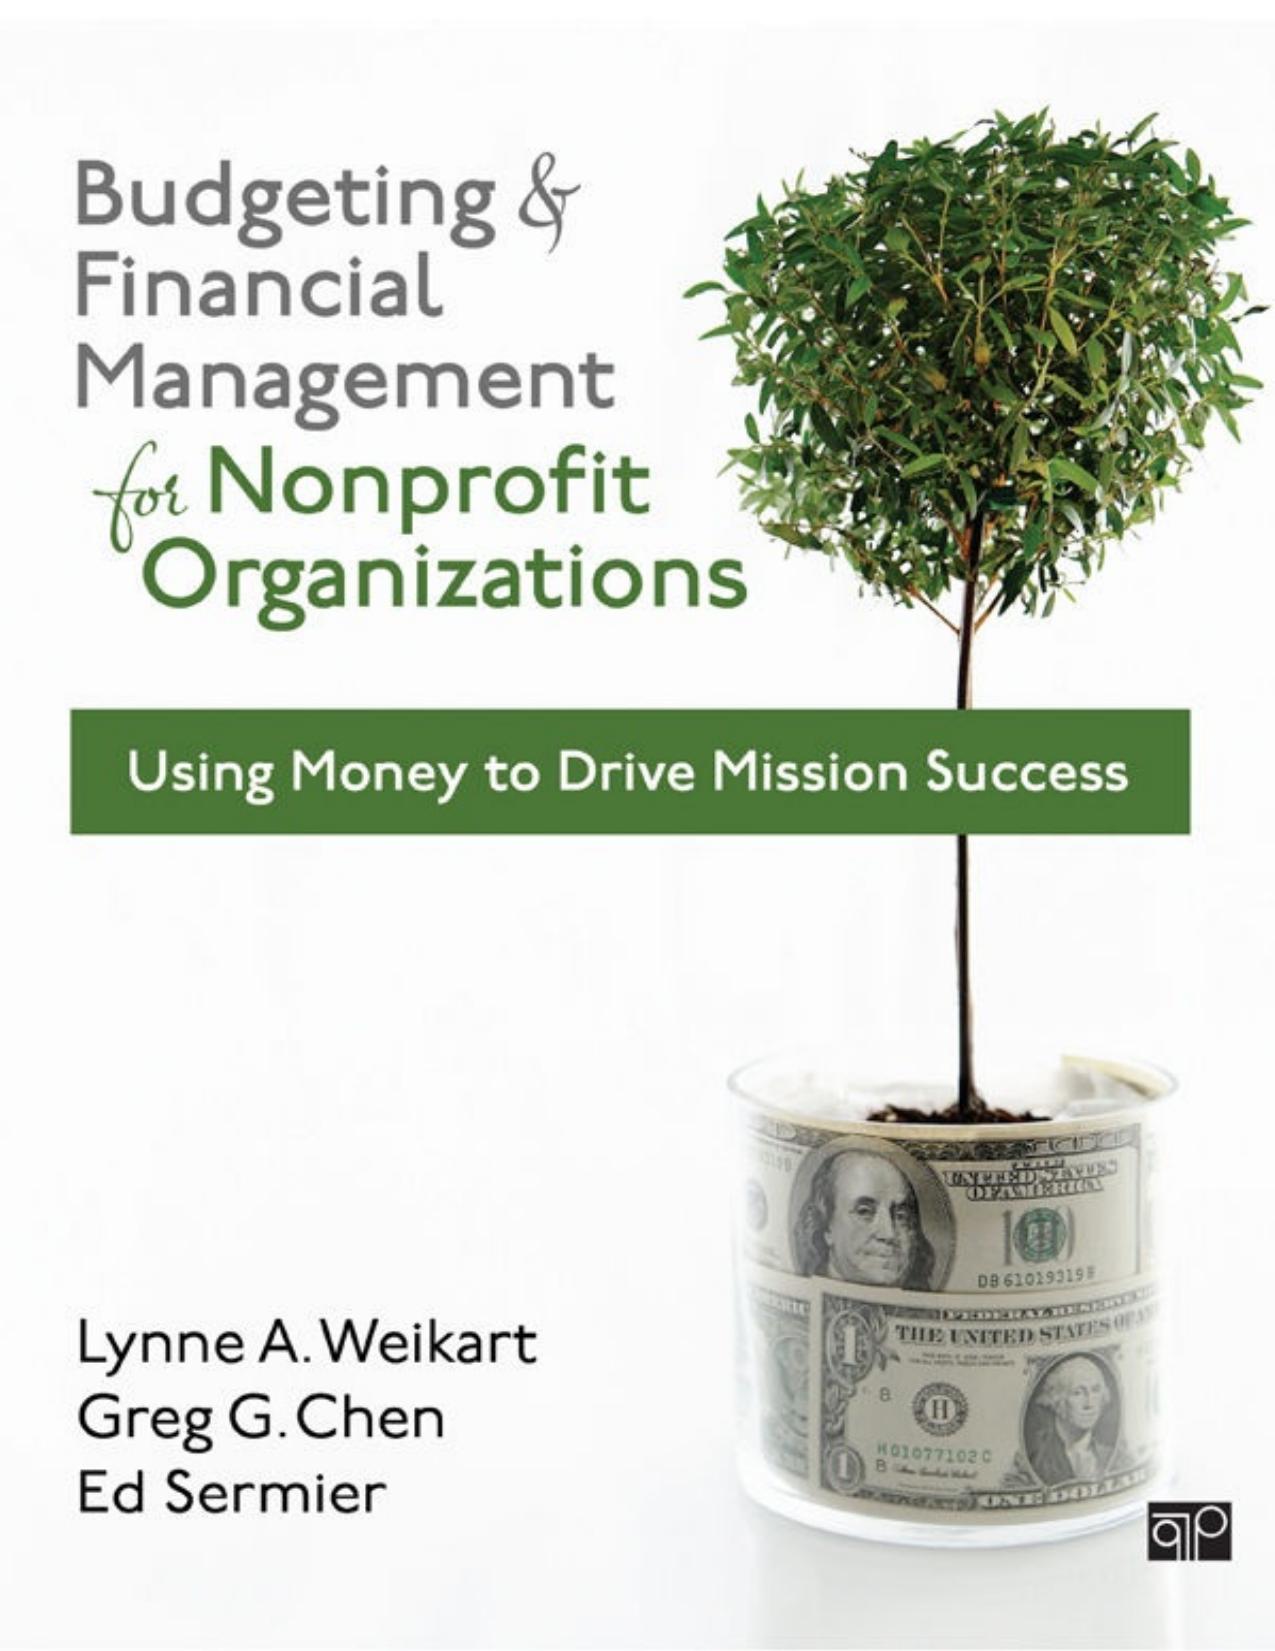 Budgeting and Financial Management for Nonprofit Organizations Using Money to Drive Mission Success